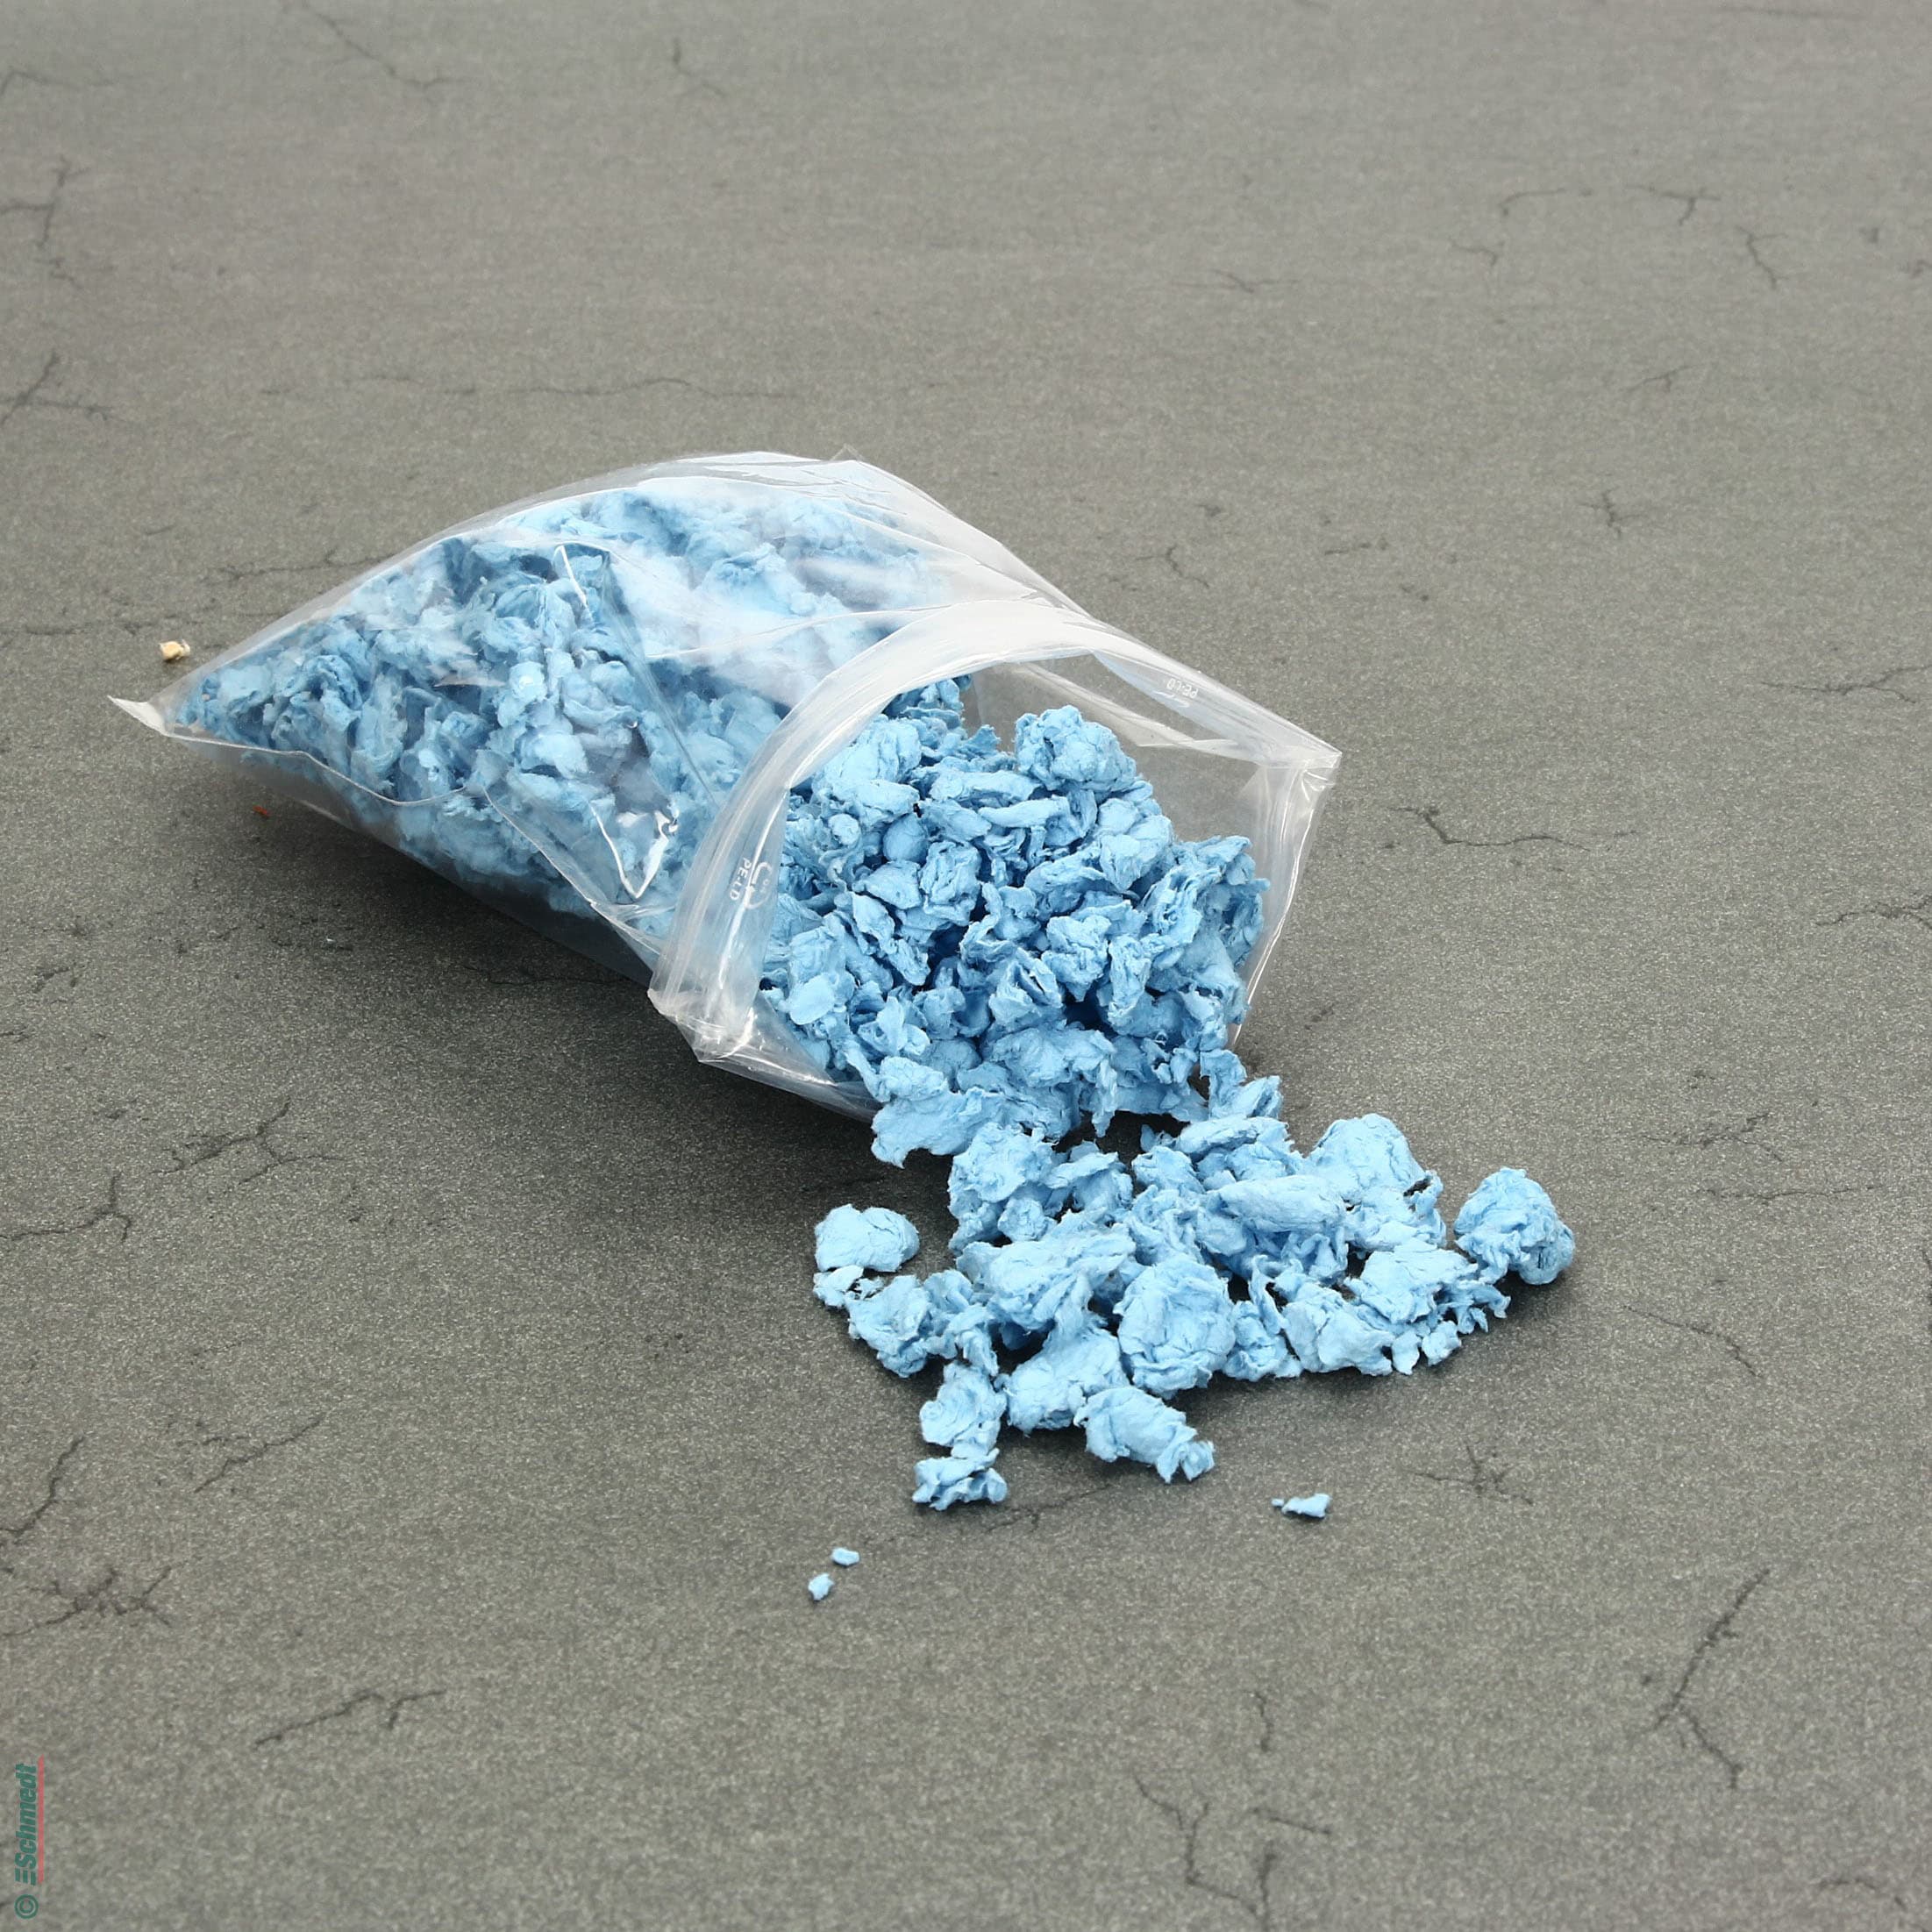 Paper fibres made of pure cotton - Colour 009 - inky blue - to make fibre pulp for paper conservation...